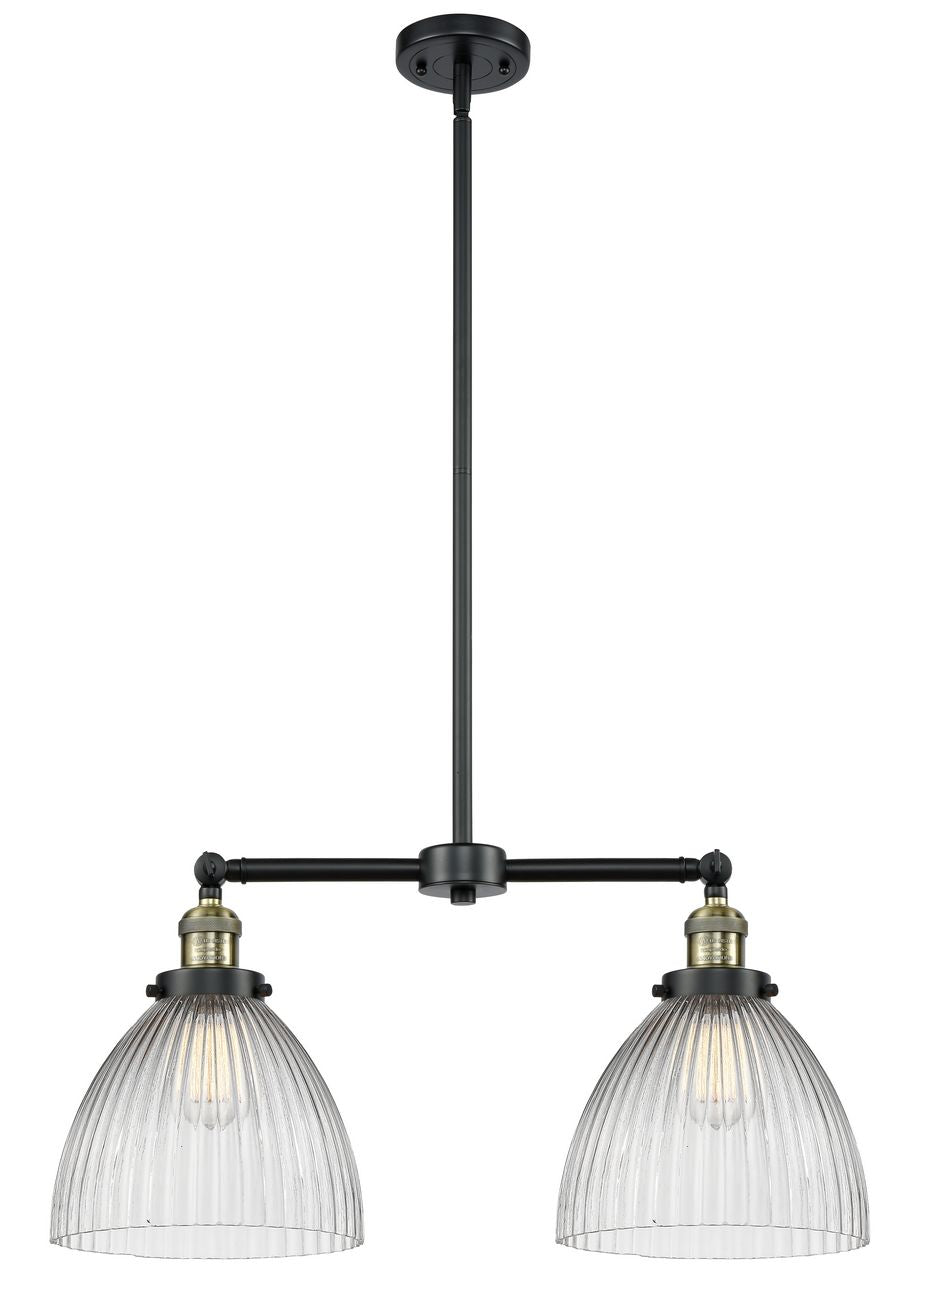 209-BAB-G222 2-Light 21" Black Antique Brass Island Light - Clear Halophane Seneca Falls Glass - LED Bulb - Dimmensions: 21 x 5 x 10<br>Minimum Height : 23.125<br>Maximum Height : 47.125 - Sloped Ceiling Compatible: Yes